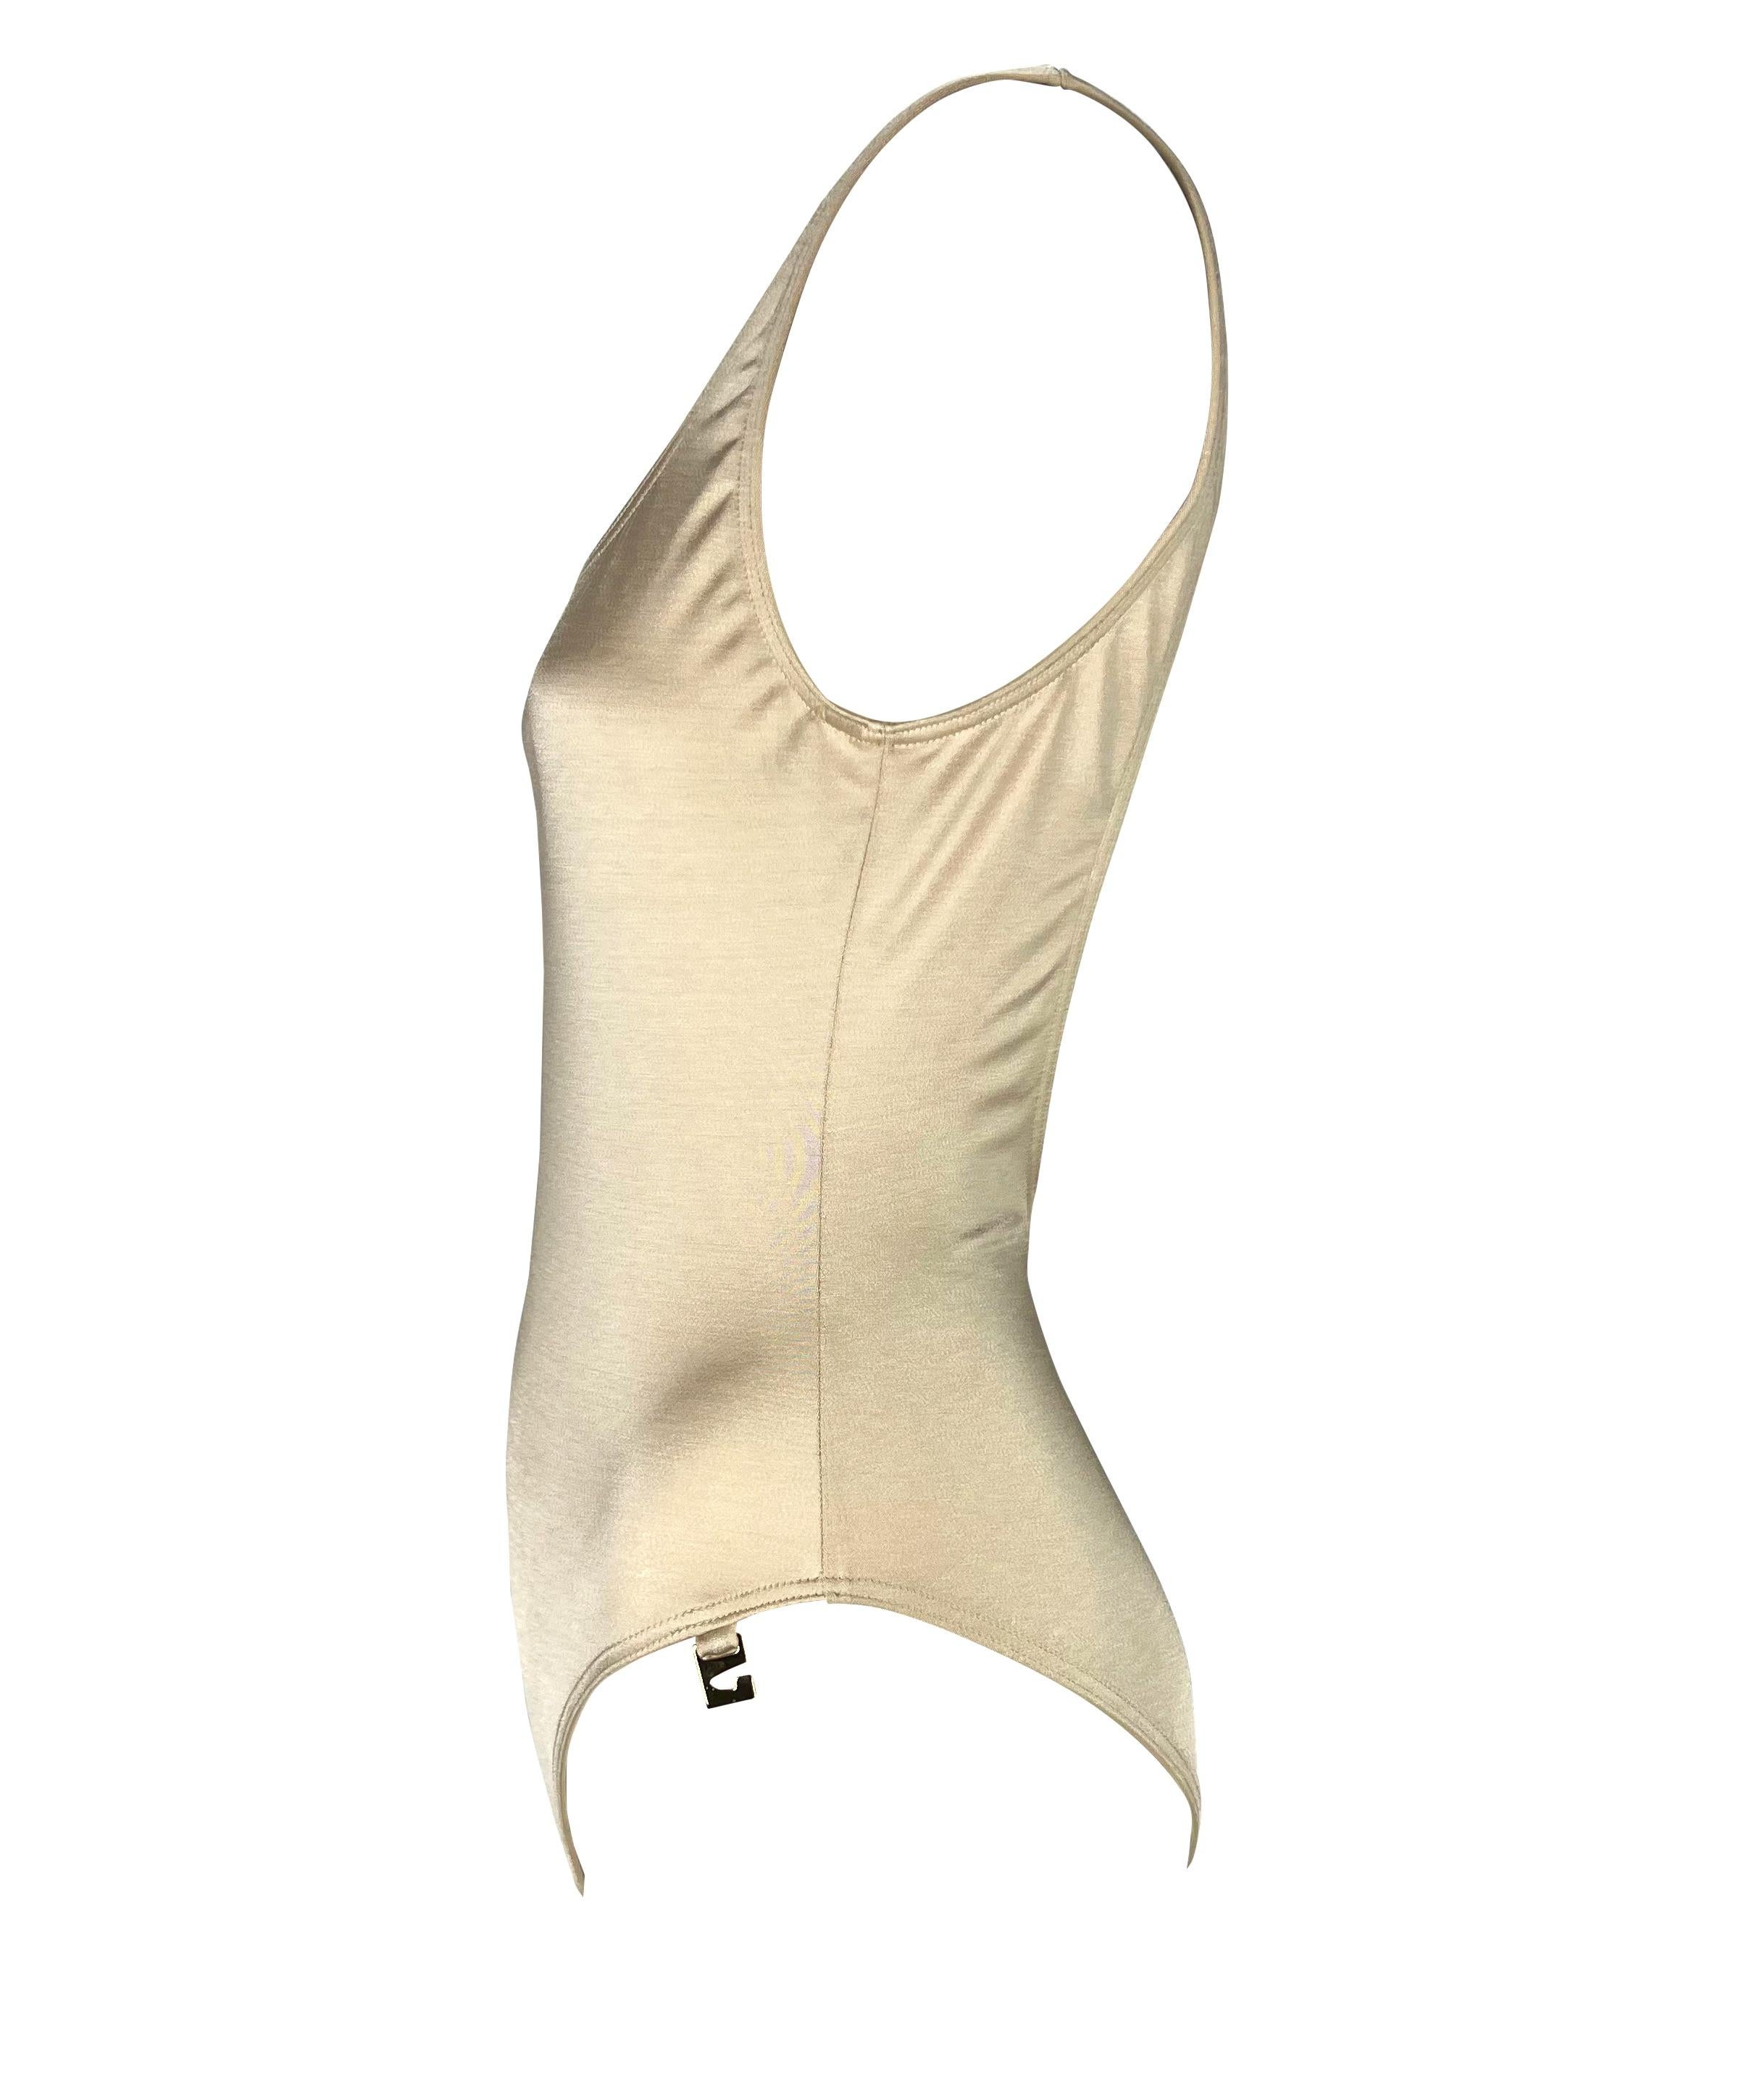 Presenting a gorgeous beige Gucci one-piece swimsuit, designed by Tom Ford. From the Spring/Summer 1997 collection, this bathing suit features a scoop neckline, open back, and gold-tone abstract Gucci 'G' medallion. Never worn before, this